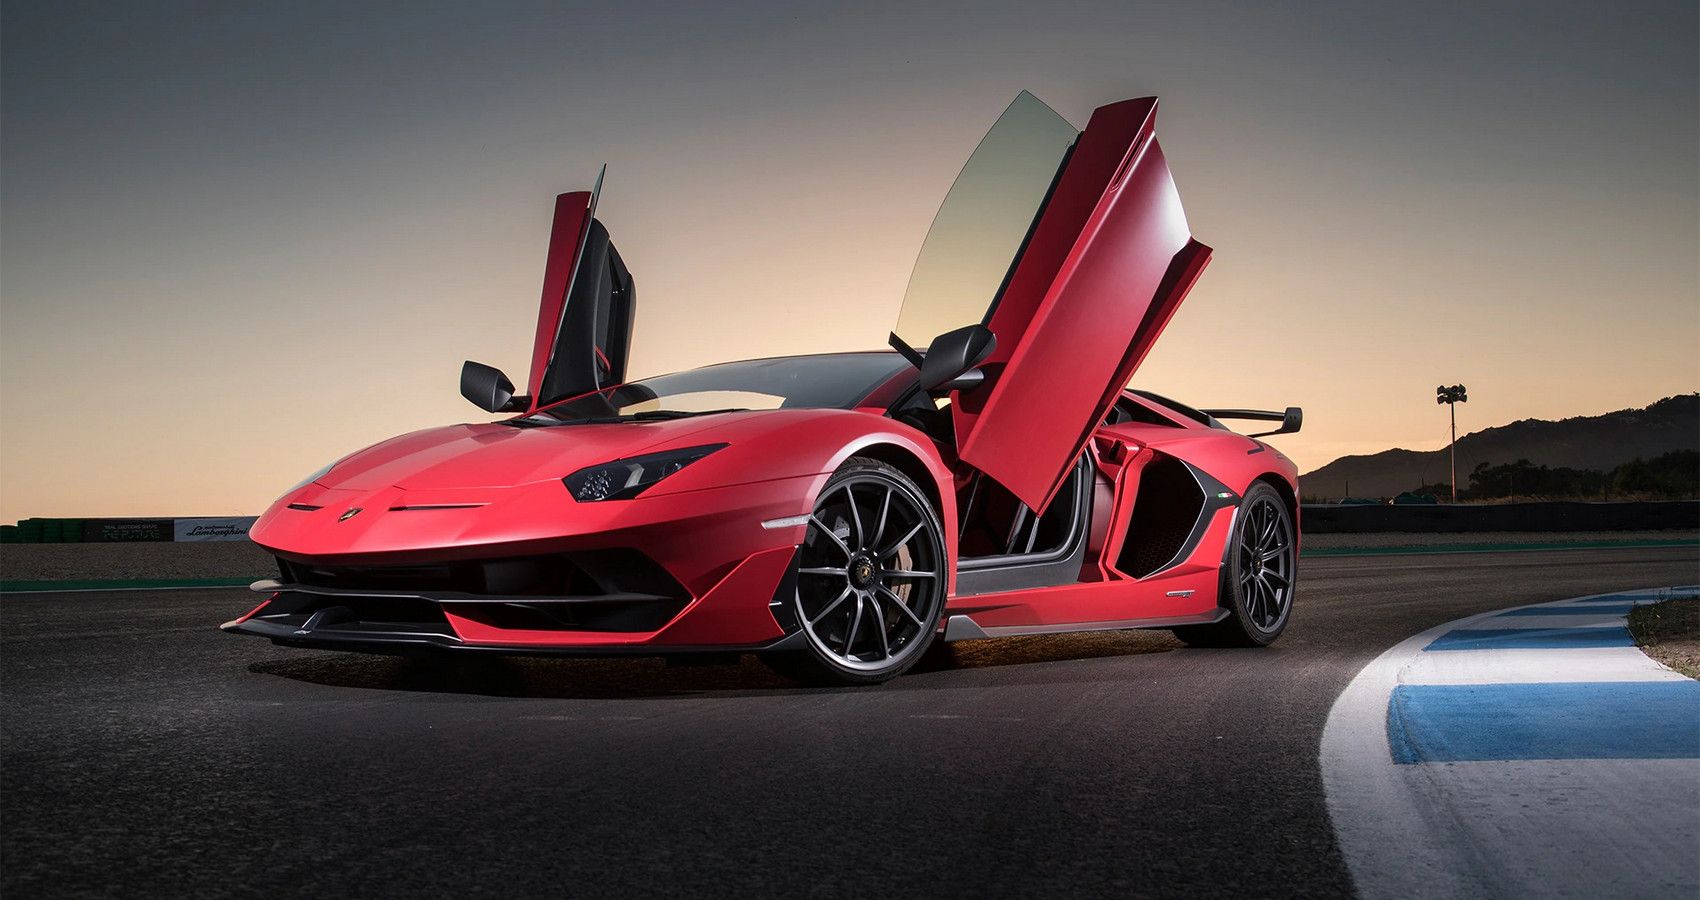 Aventador SV - Front View